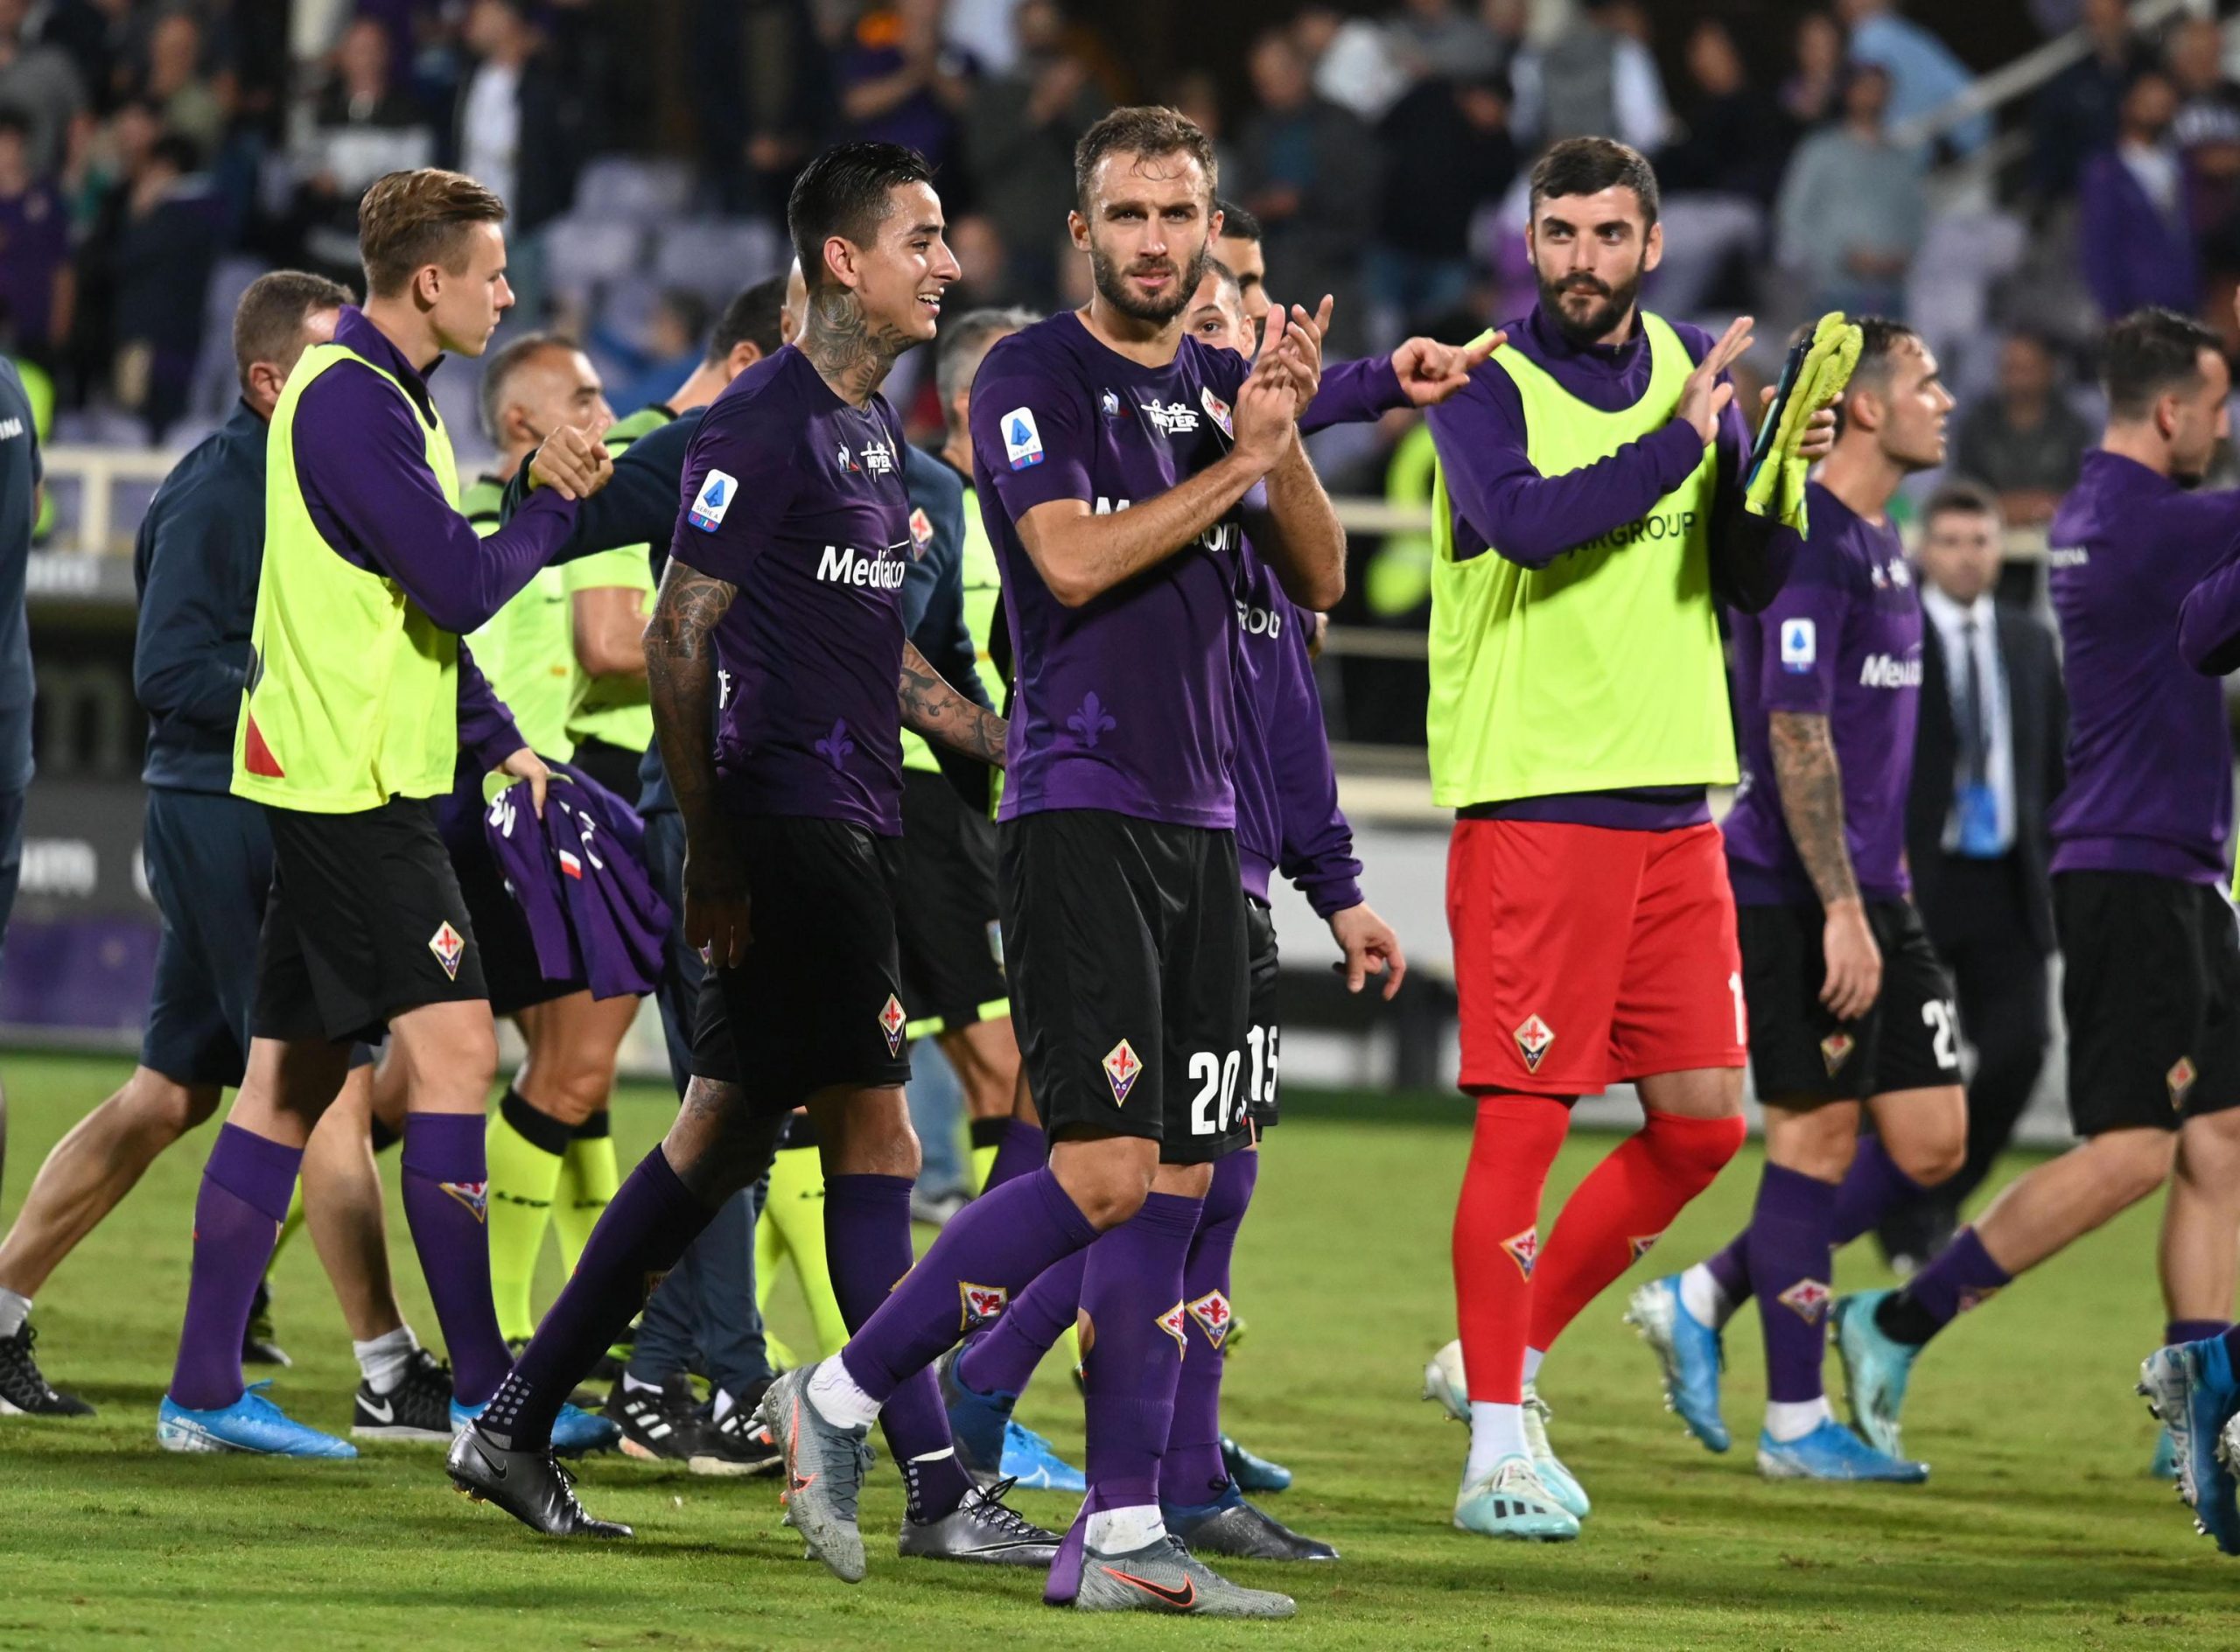 epa08408338 (FILE) - epa07869659 Fiorentina players celebrate after winning the Italian Serie A soccer match between ACF Fiorentina and UC Sampdoria at the Artemio Franchi stadium in Florence, Italy, 25 September 2019 (re-issued on 07 May 2020). On 07 May 2020 ACF Fiorentina communicated on its website that, following  laboratory checks, 3 players and 3 technical-health staff members tested positive for COVID-19. The club has proceeded, as per protocol, to continue the isolation of the people involved'. Fiorentina did not reveal the identities of the players who tested positive.  EPA/CLAUDIO GIOVANNINI *** Local Caption *** 55495764